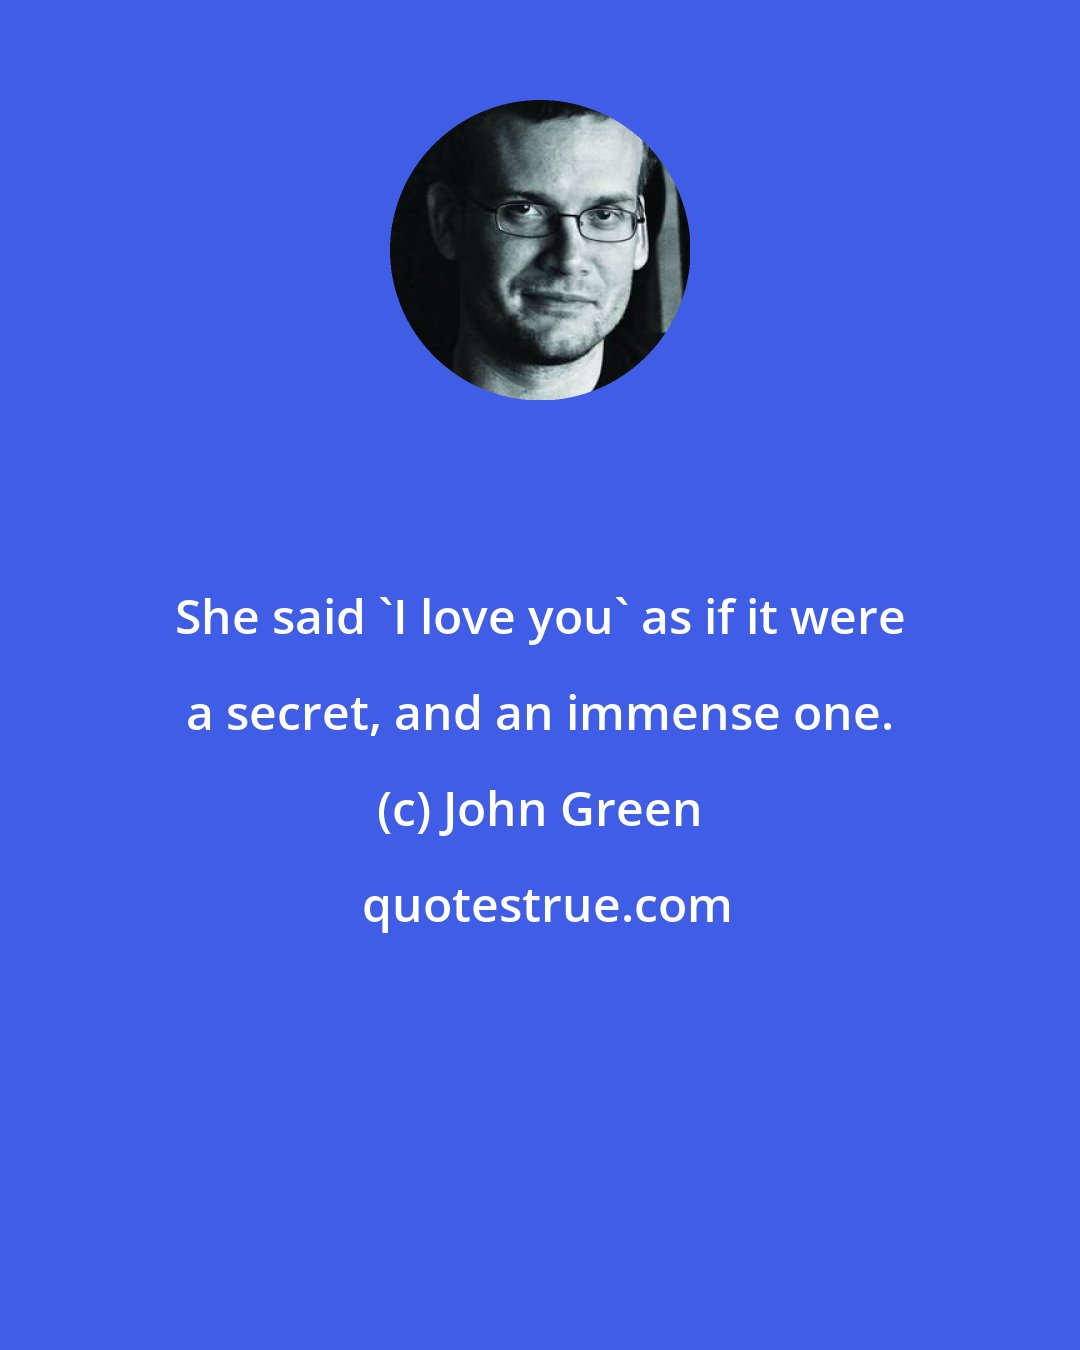 John Green: She said 'I love you' as if it were a secret, and an immense one.